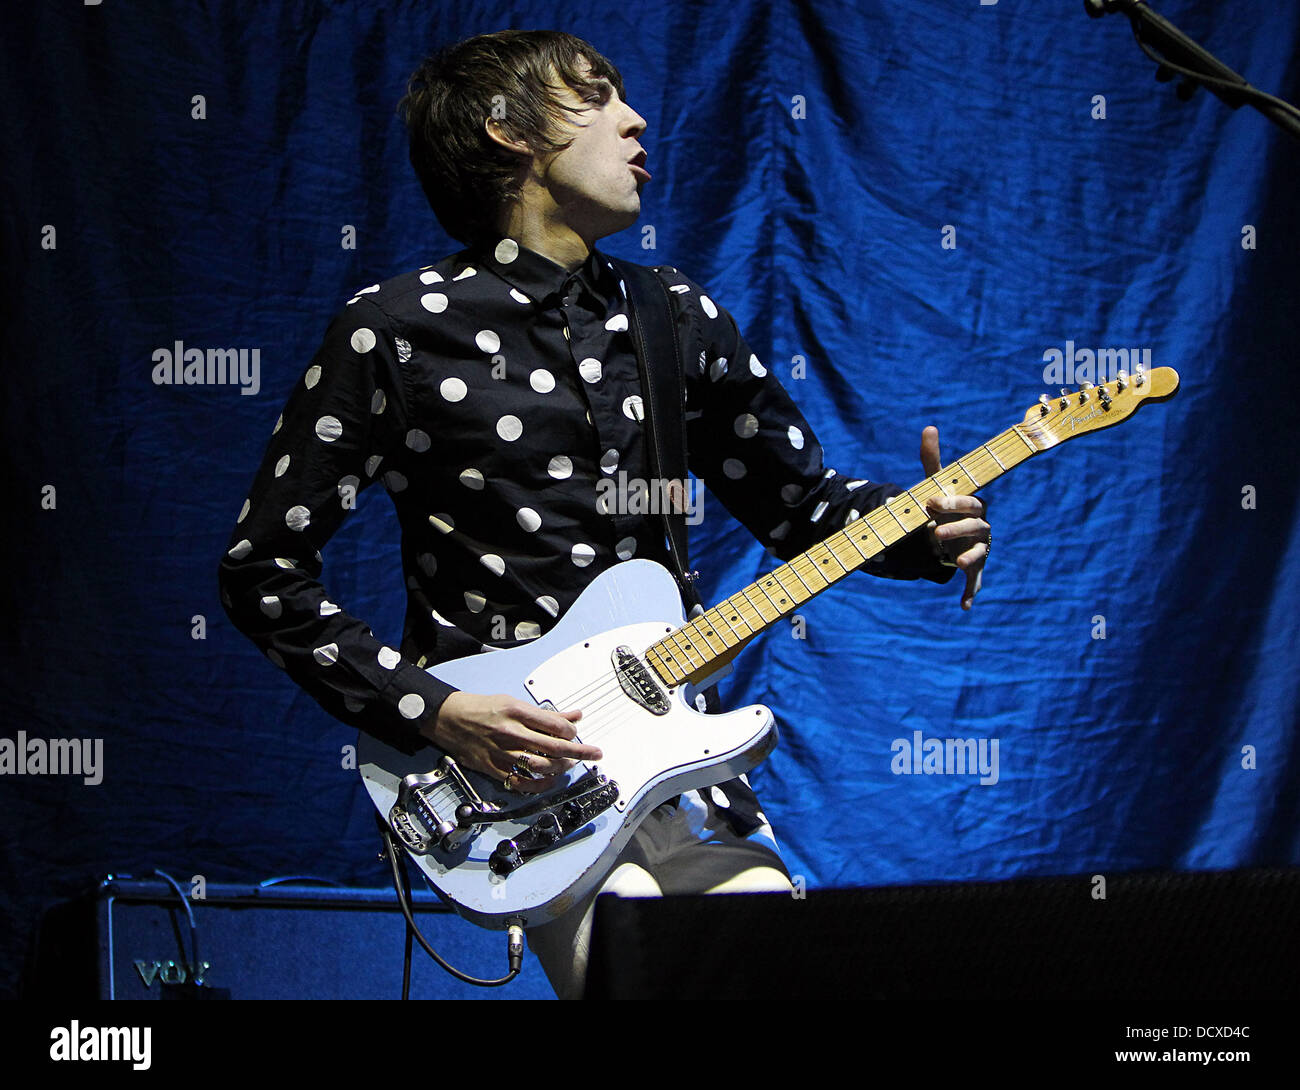 Miles Kane performing onstage at the O2 Arena. London, England - 14.12.11 Stock Photo